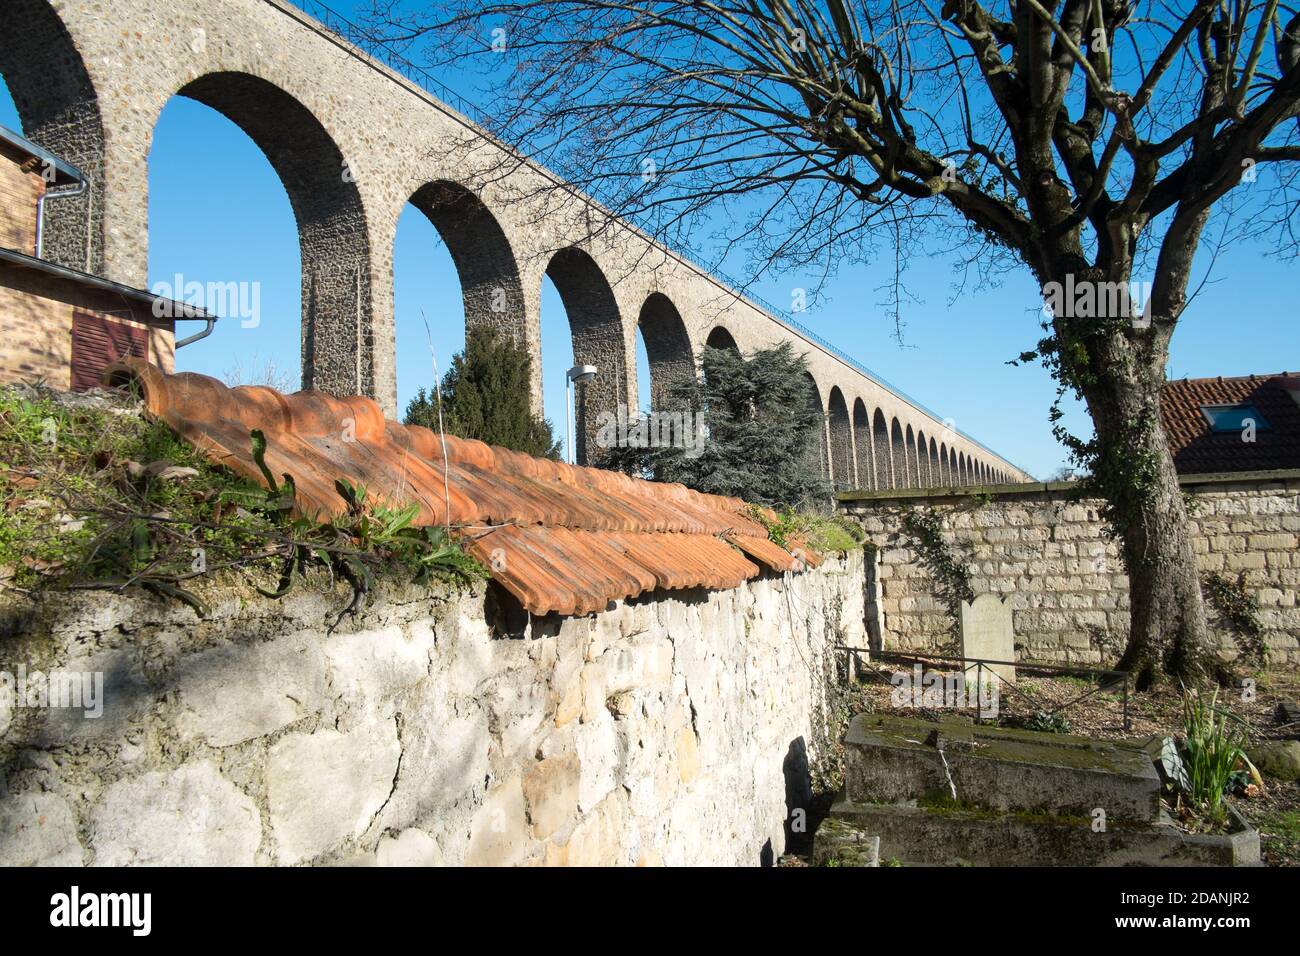 Aquaduct, Cachan Cemetery, Arceuil-Cachan, Paris, France Stock Photo